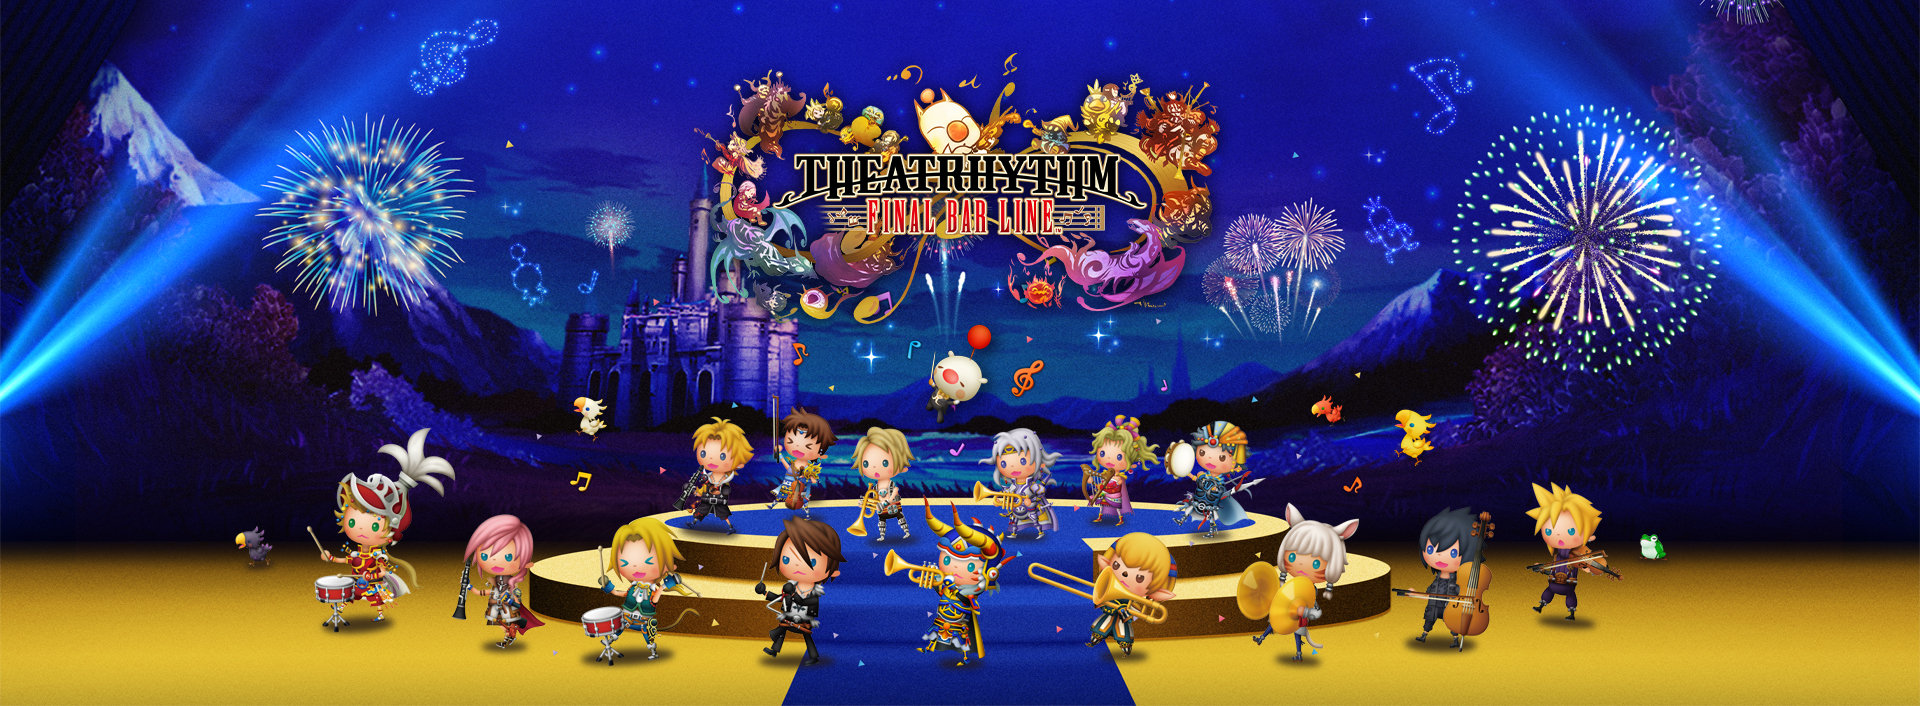 &quot;THEATRHYTHM FINAL BAR LINE&quot; Notification of upcoming patch